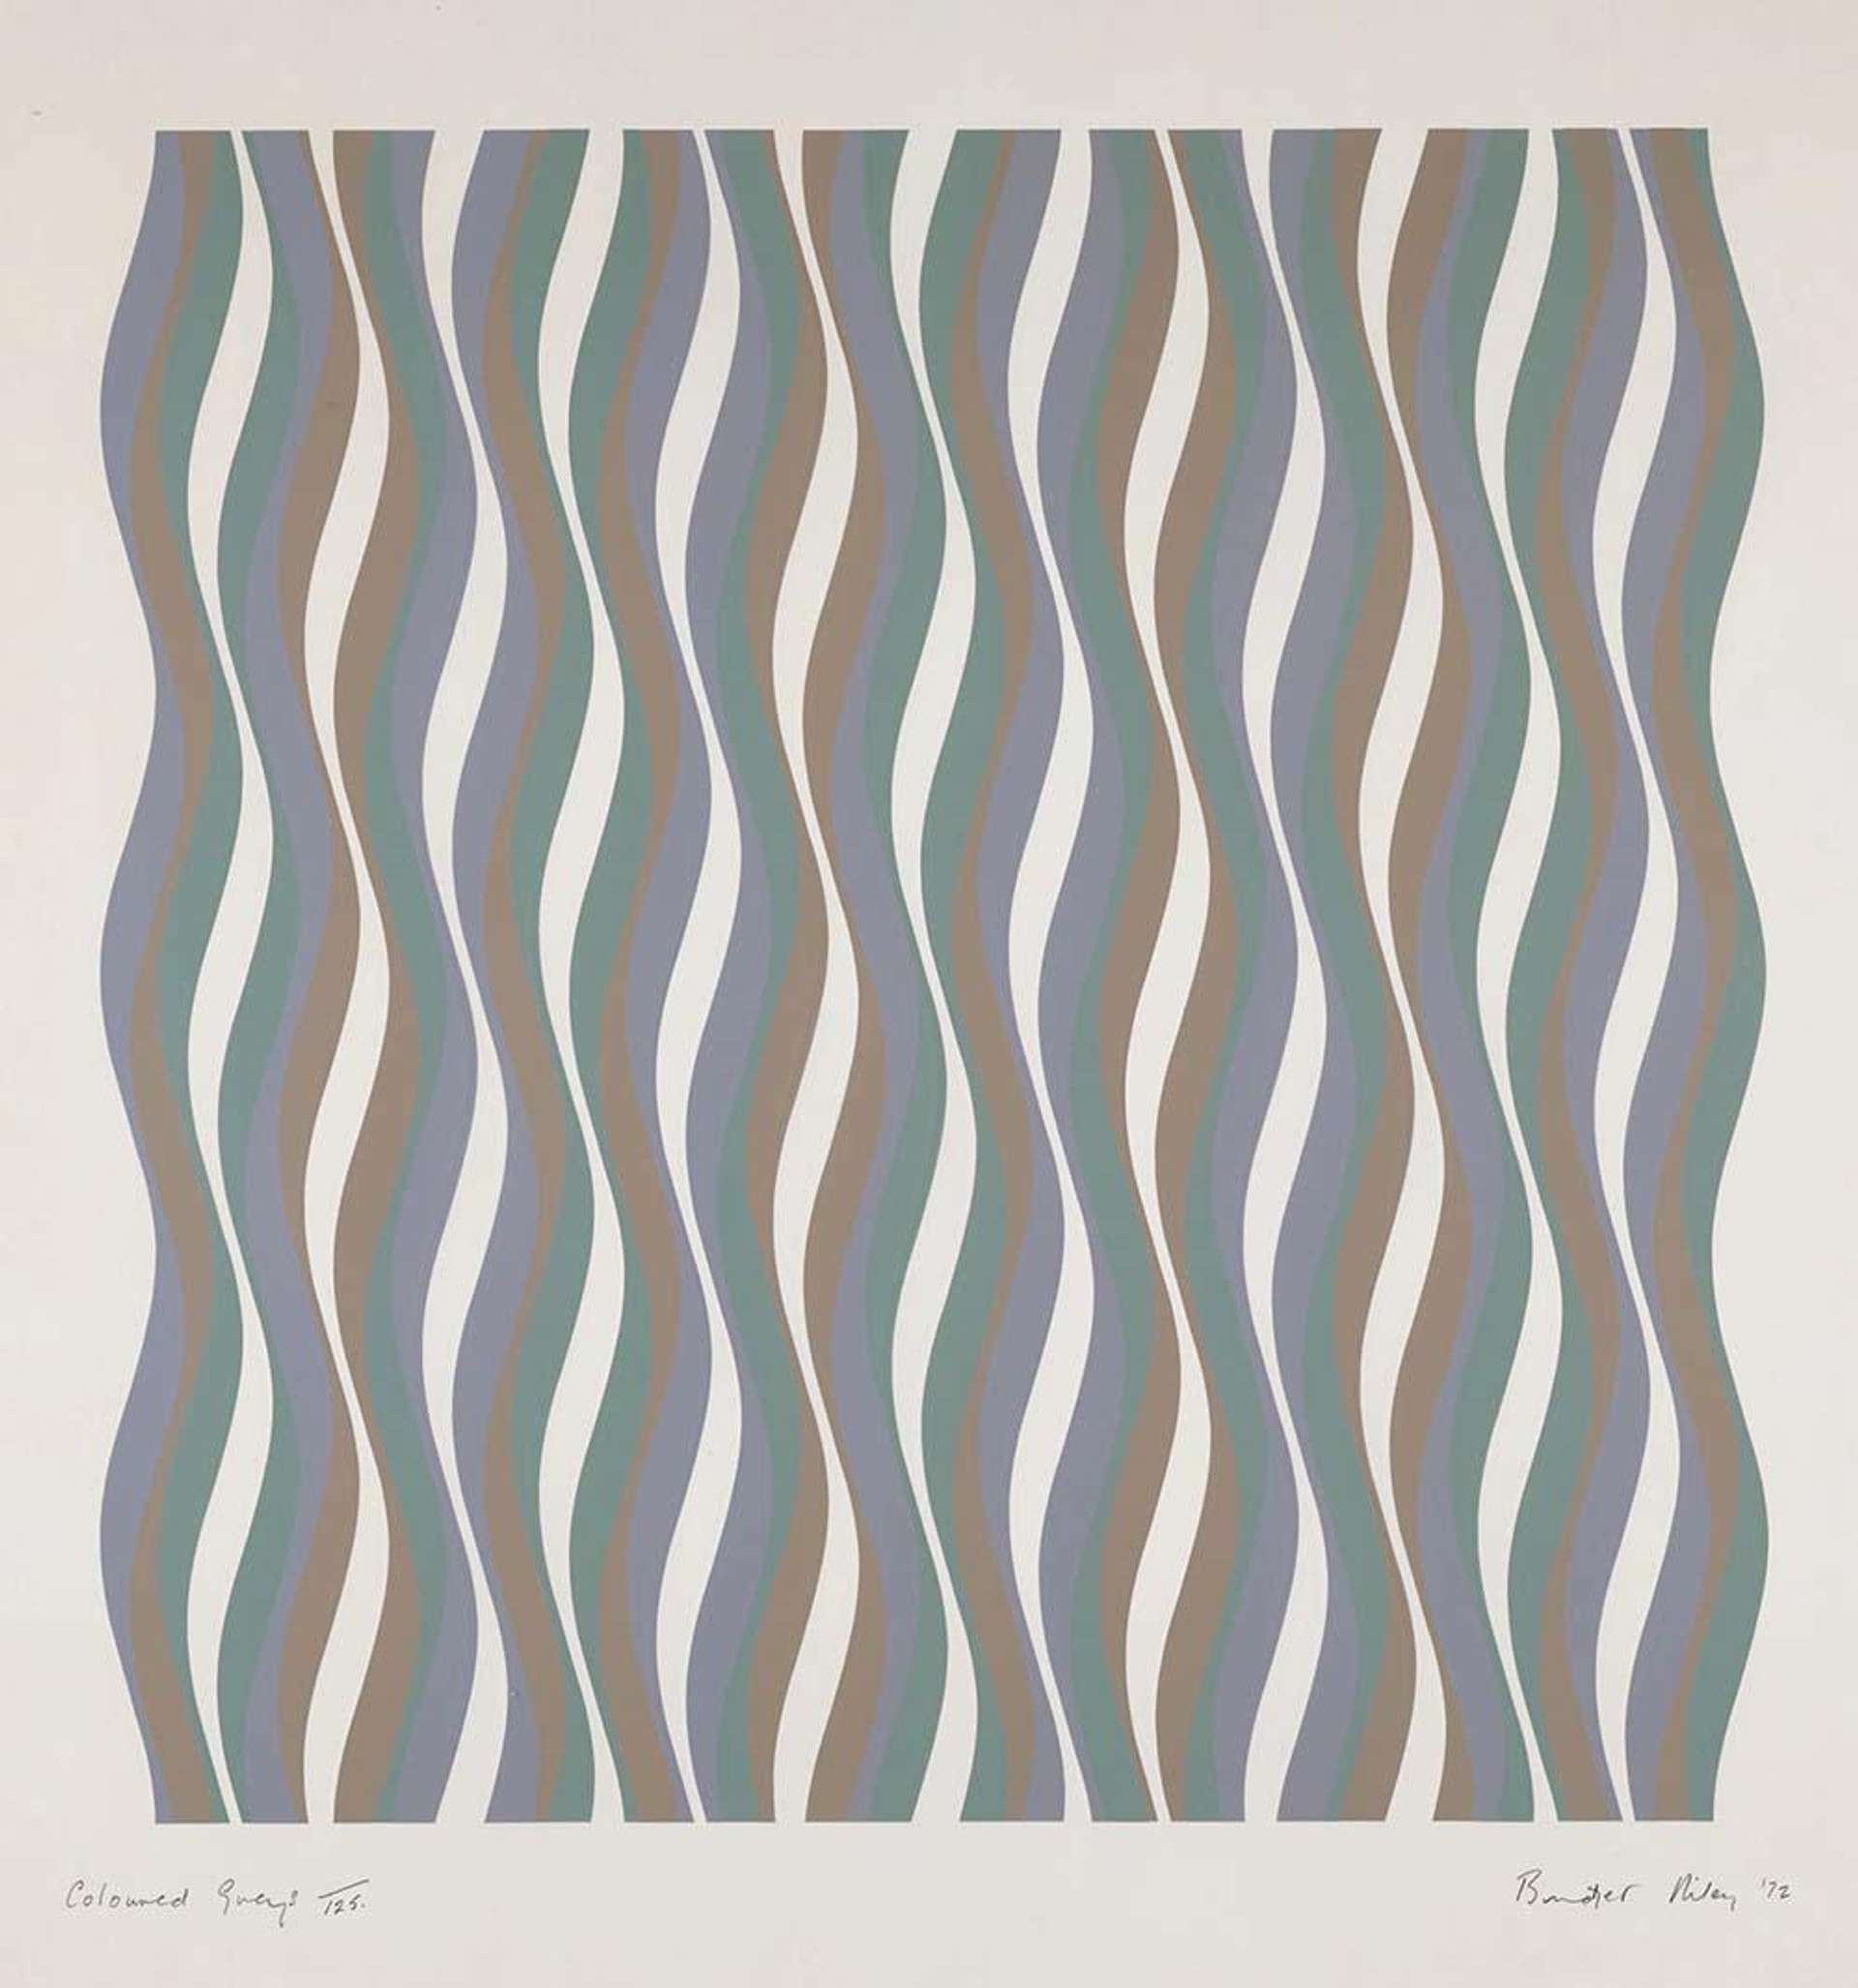 A screenprint by Bridget Riley formed of wavy lines in various hues of grey, extending vertically up the composition.